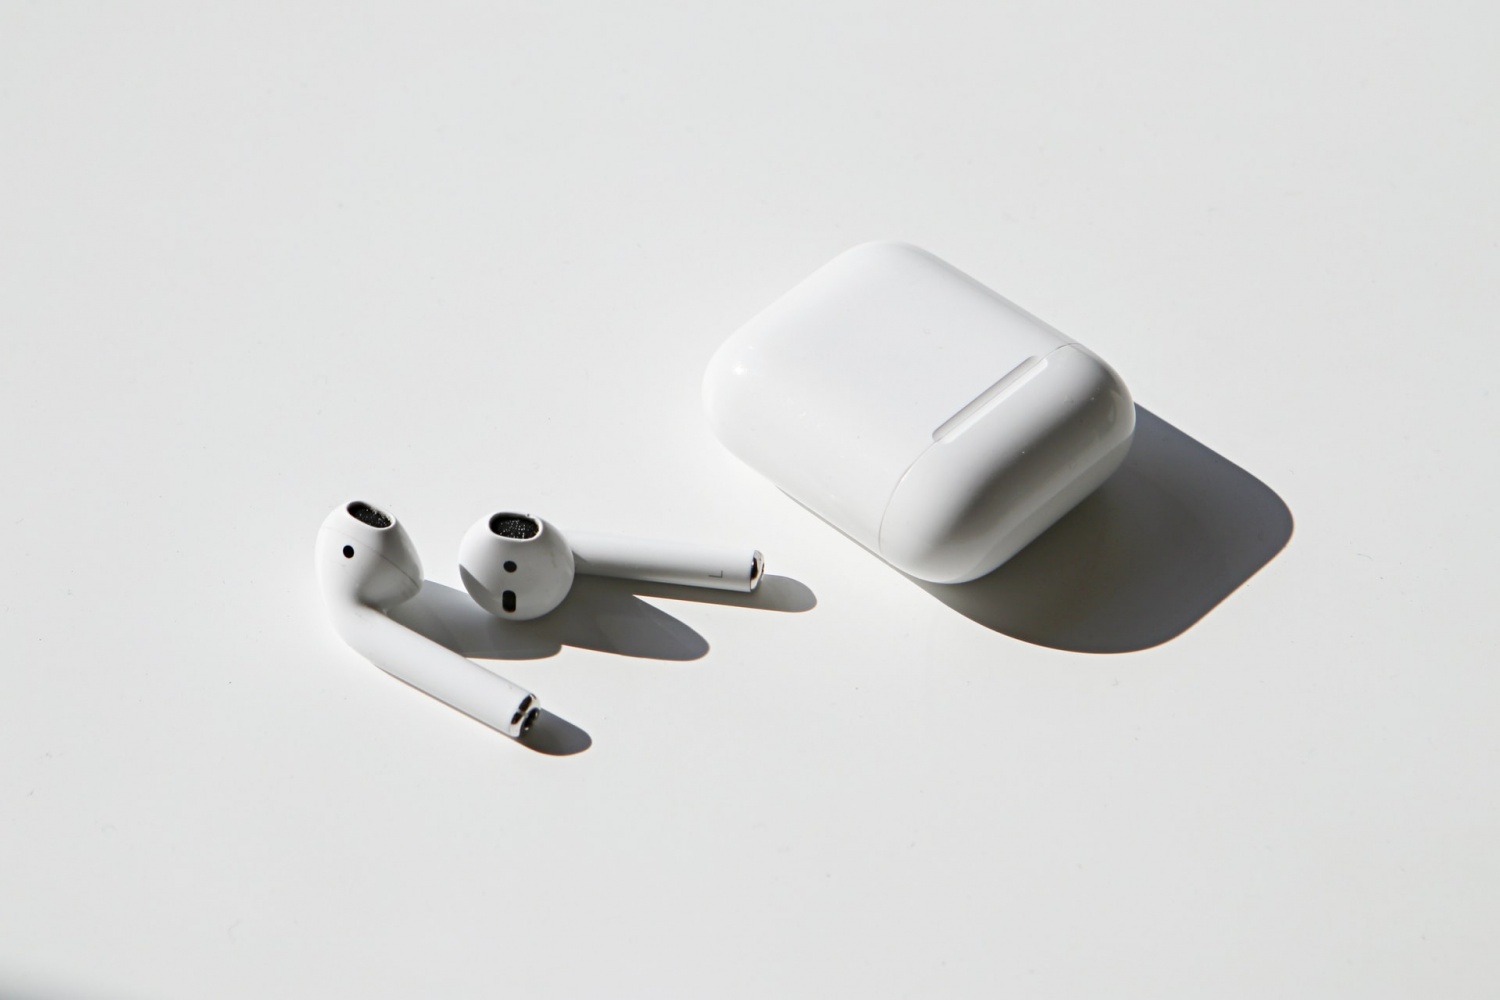 How to spot fake AirPods Pro